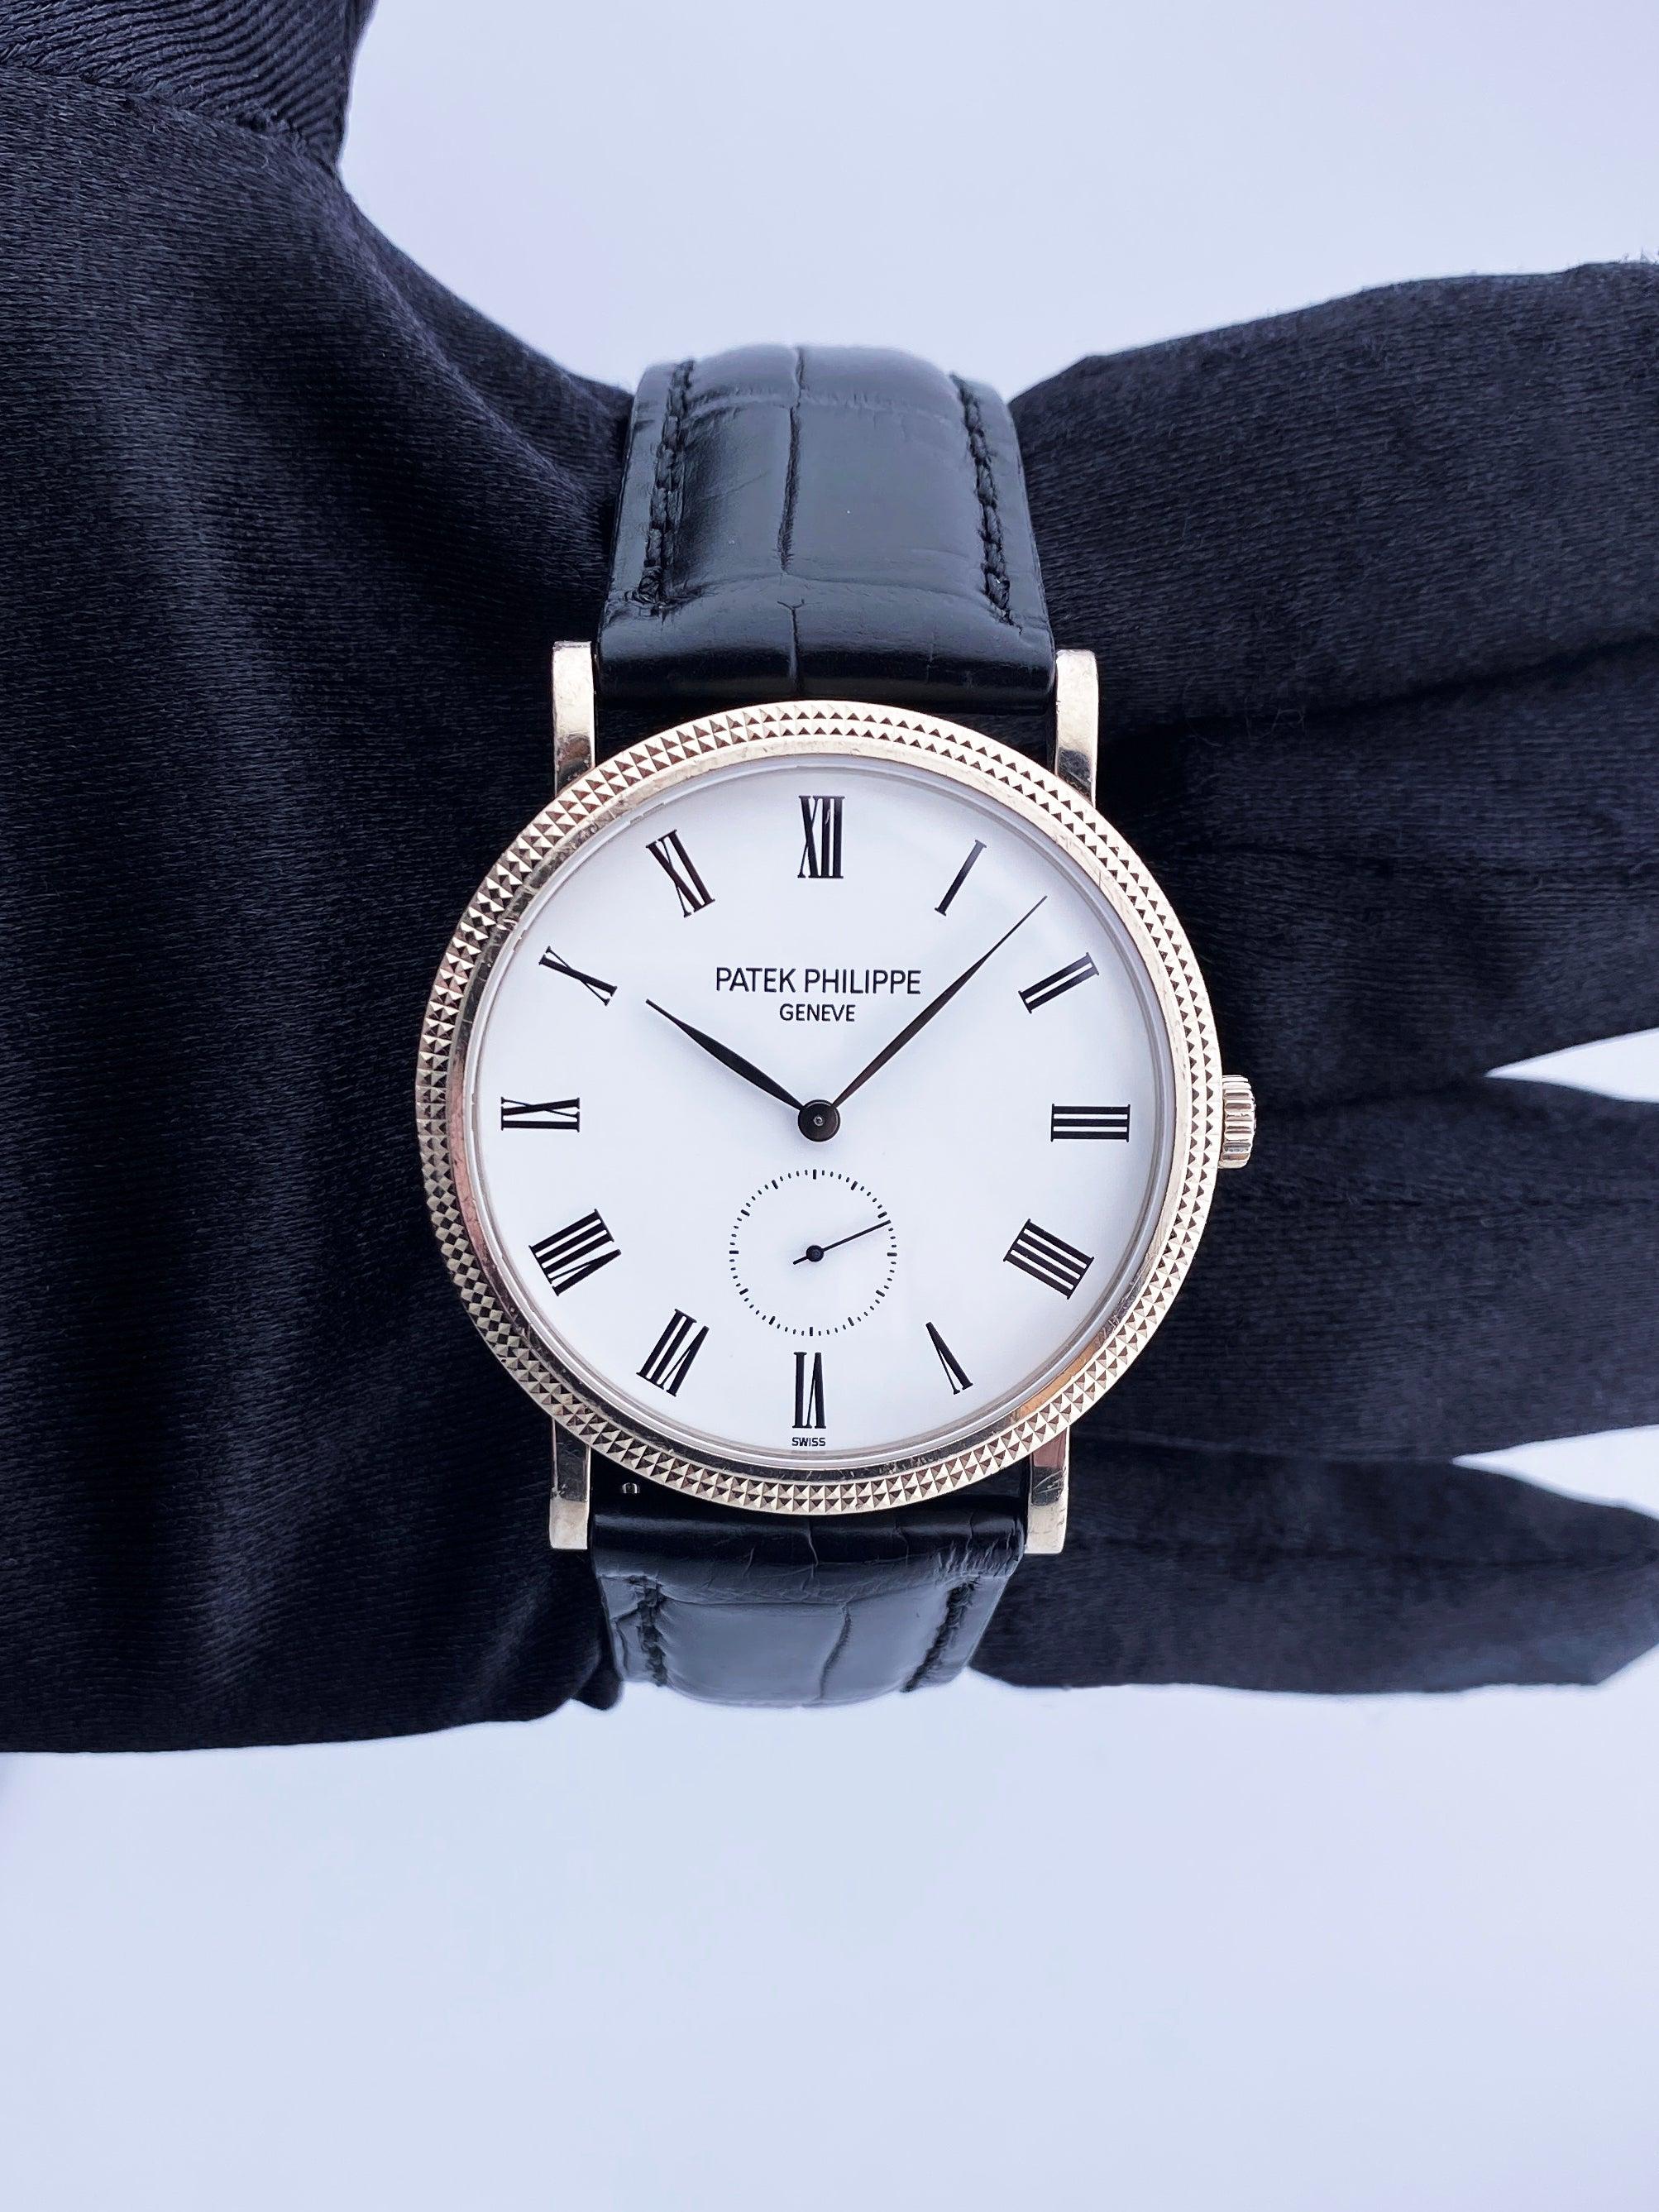 Patek Philippe Calatrava 5119G-001 Mens Watch. 36mm 18K white gold case. 18K white gold hobnail patterned bezel. White dial with black hands and black Roman numeral hour markers. Small second dial display at 6 o'clock position. Black leather Patek